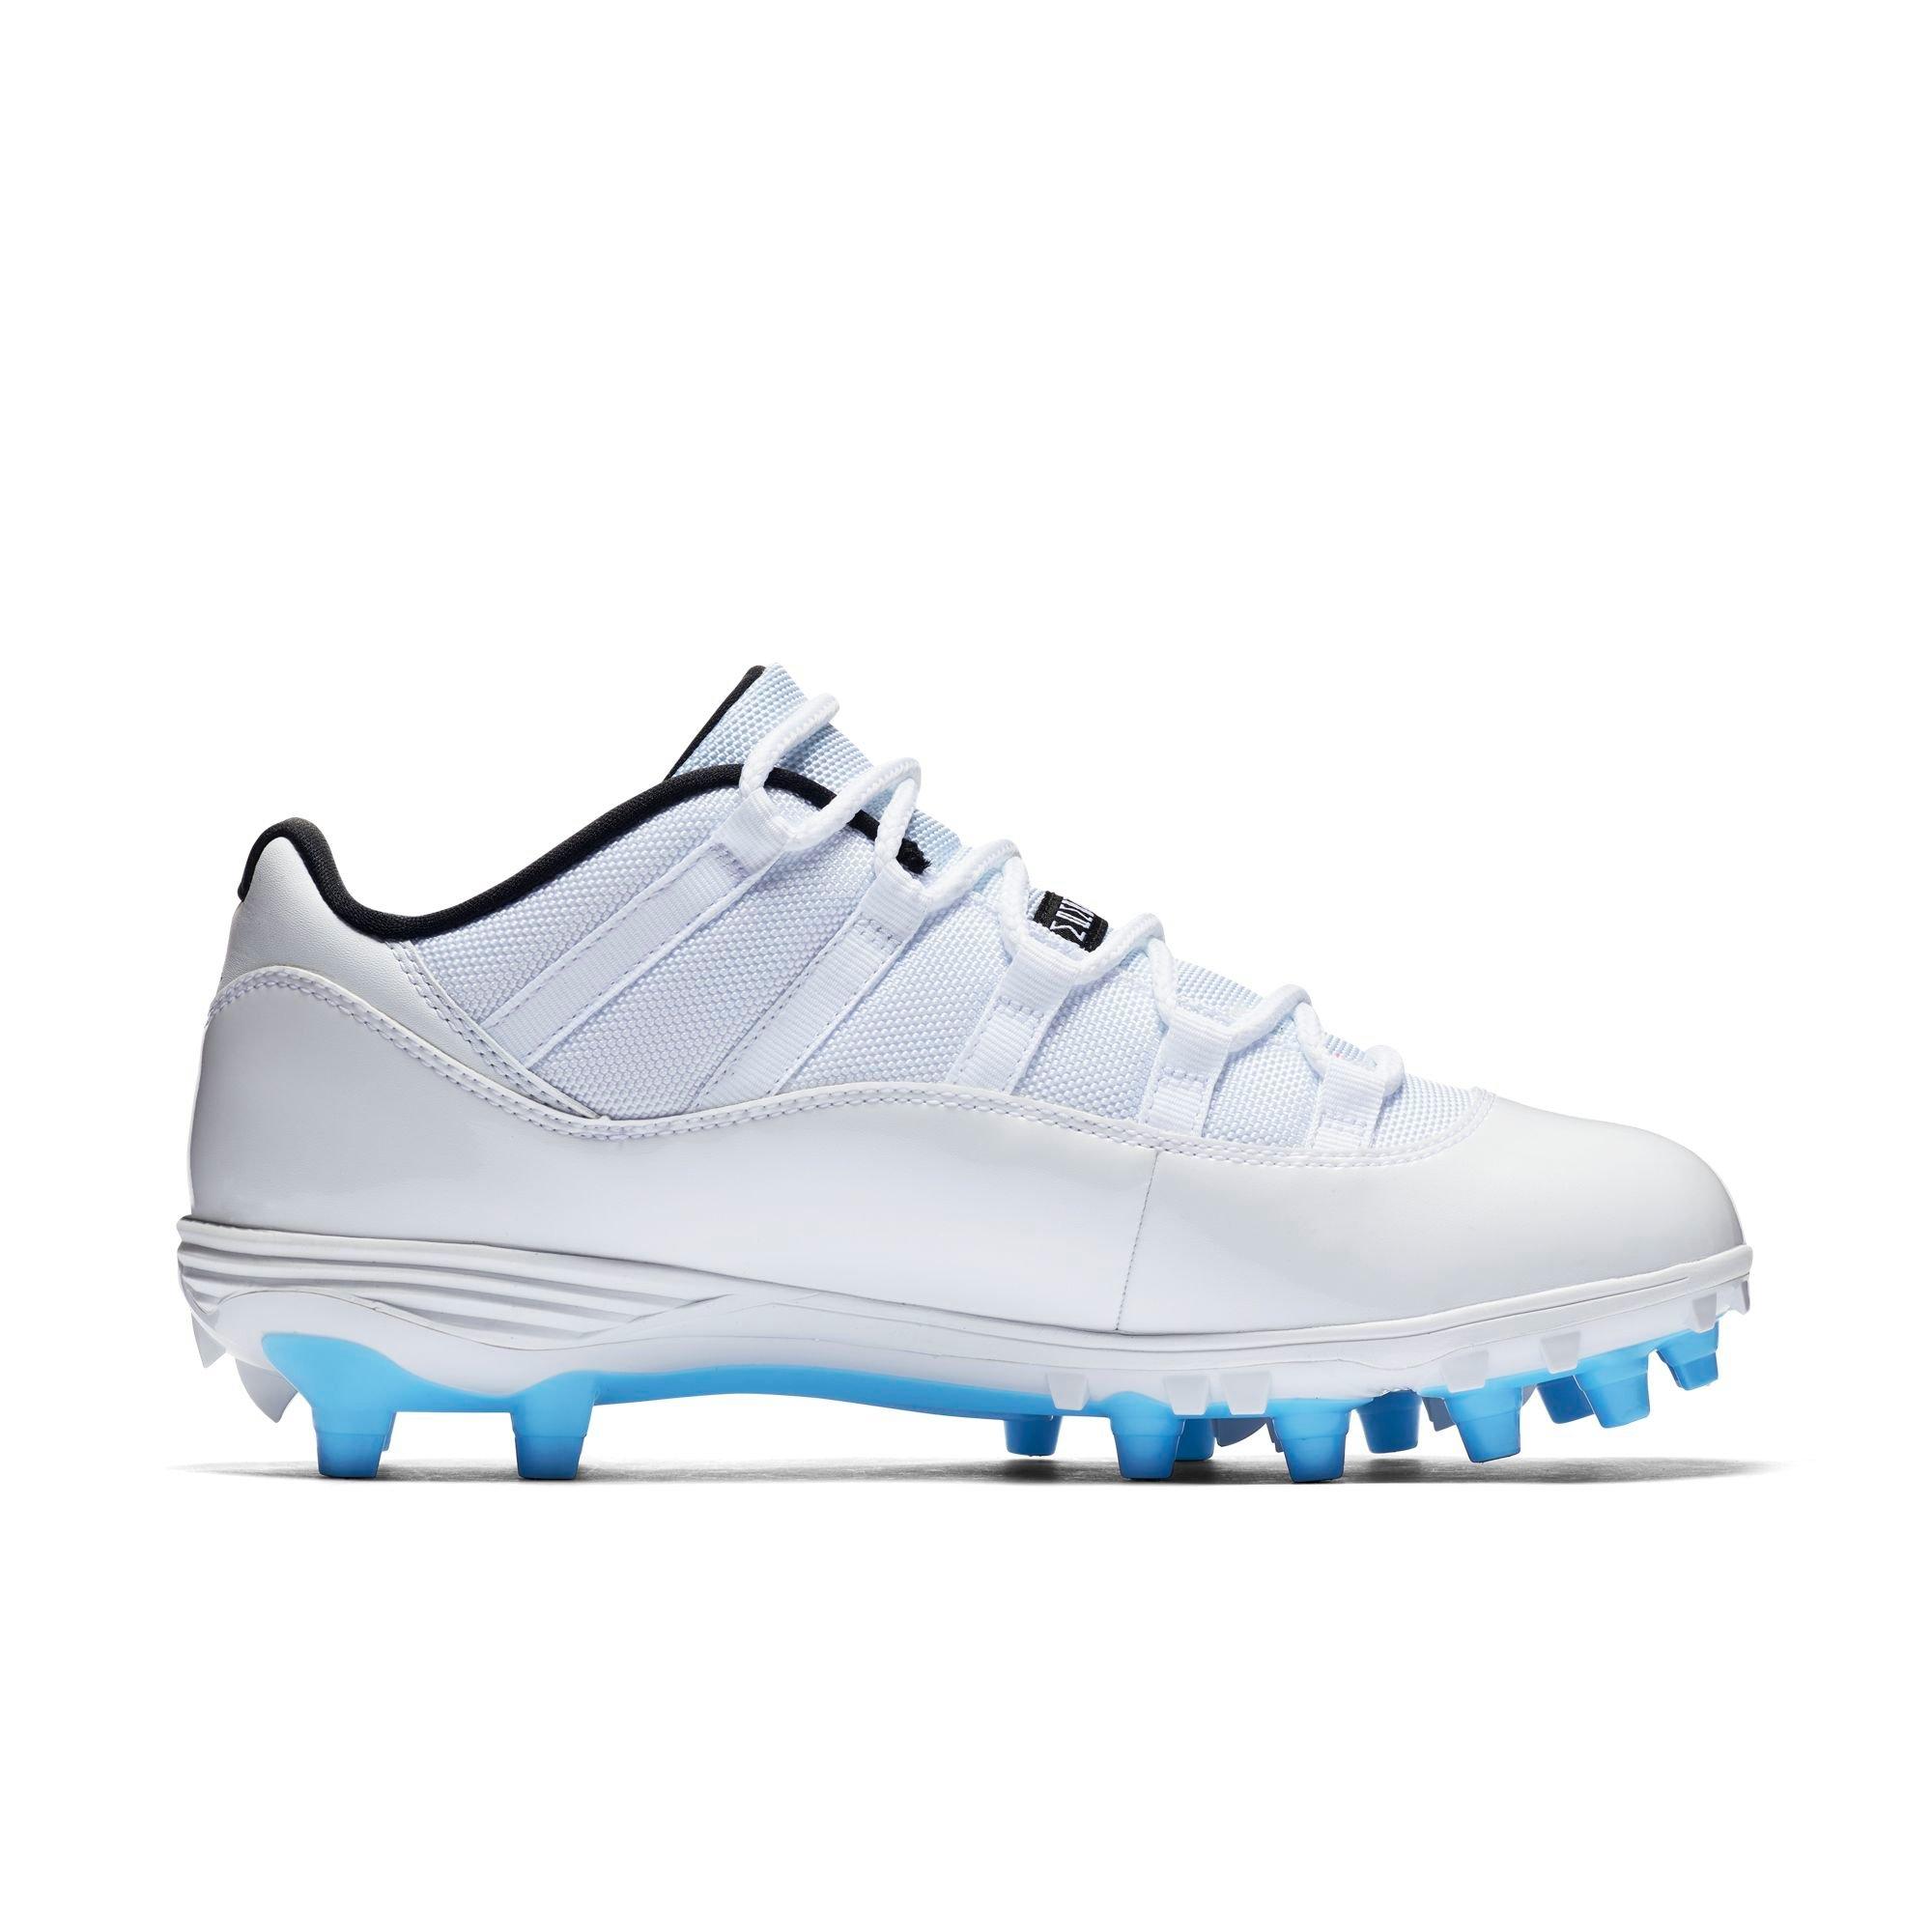 blue and white jordan cleats